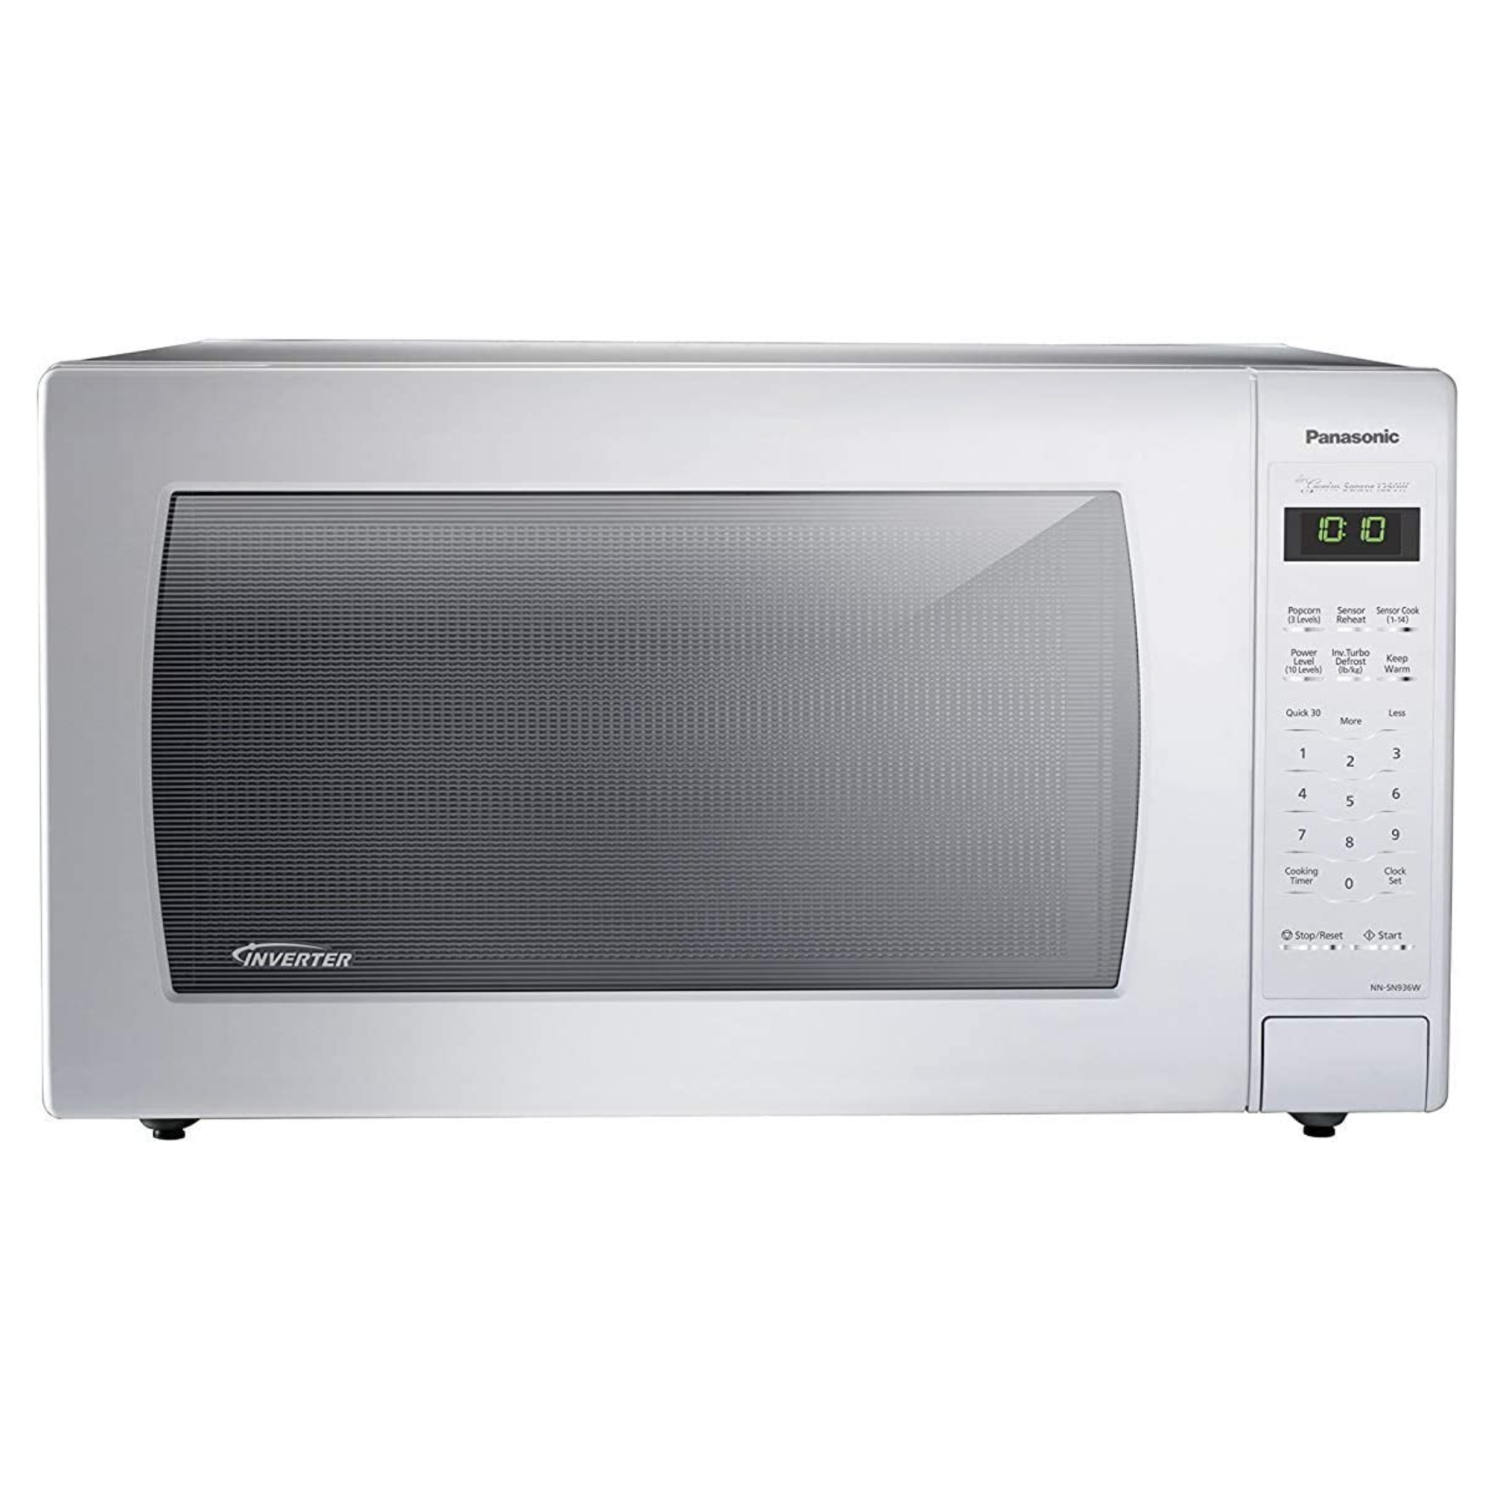 Panasonic 2.2 Cu. ft. Countertop Microwave Oven with Inverter Technology and Genius Sensor - White (NN-SN936W)